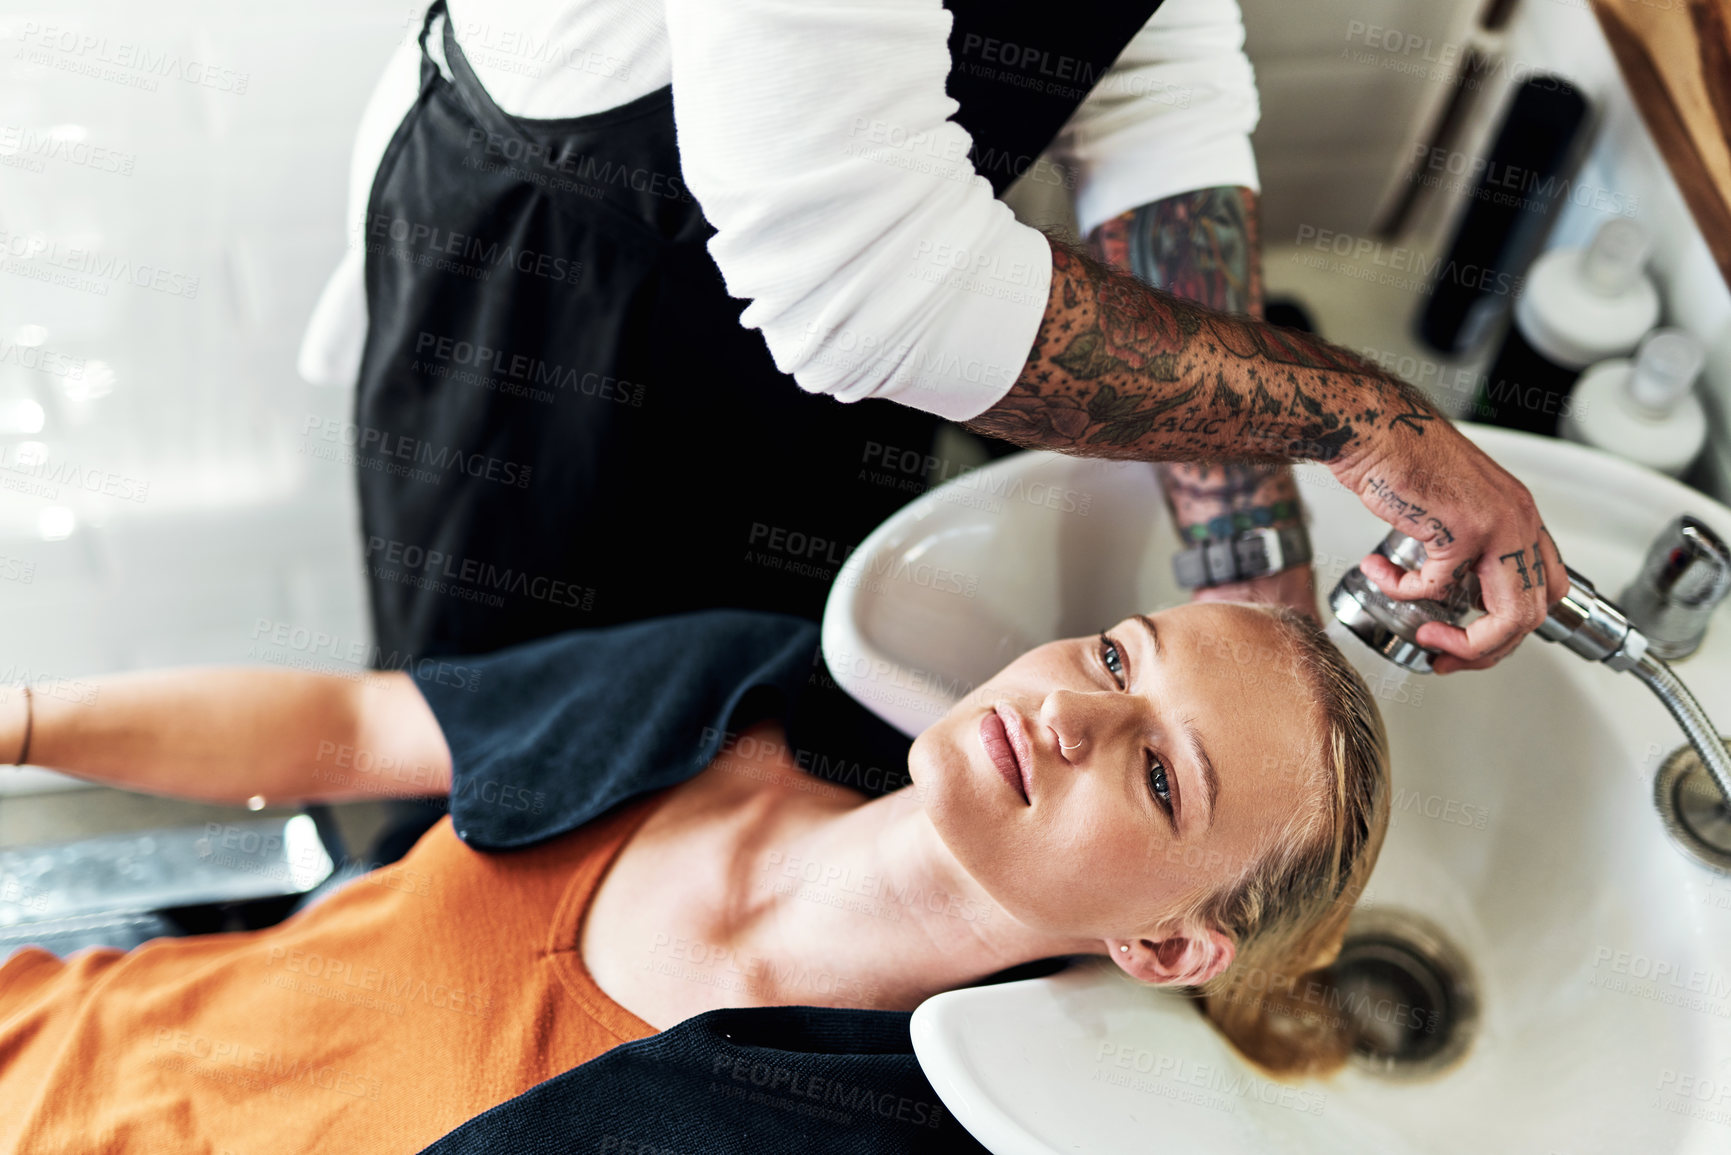 Buy stock photo Cropped shot of an attractive young woman getting her hair washed and styled by a hairdresser inside a salon